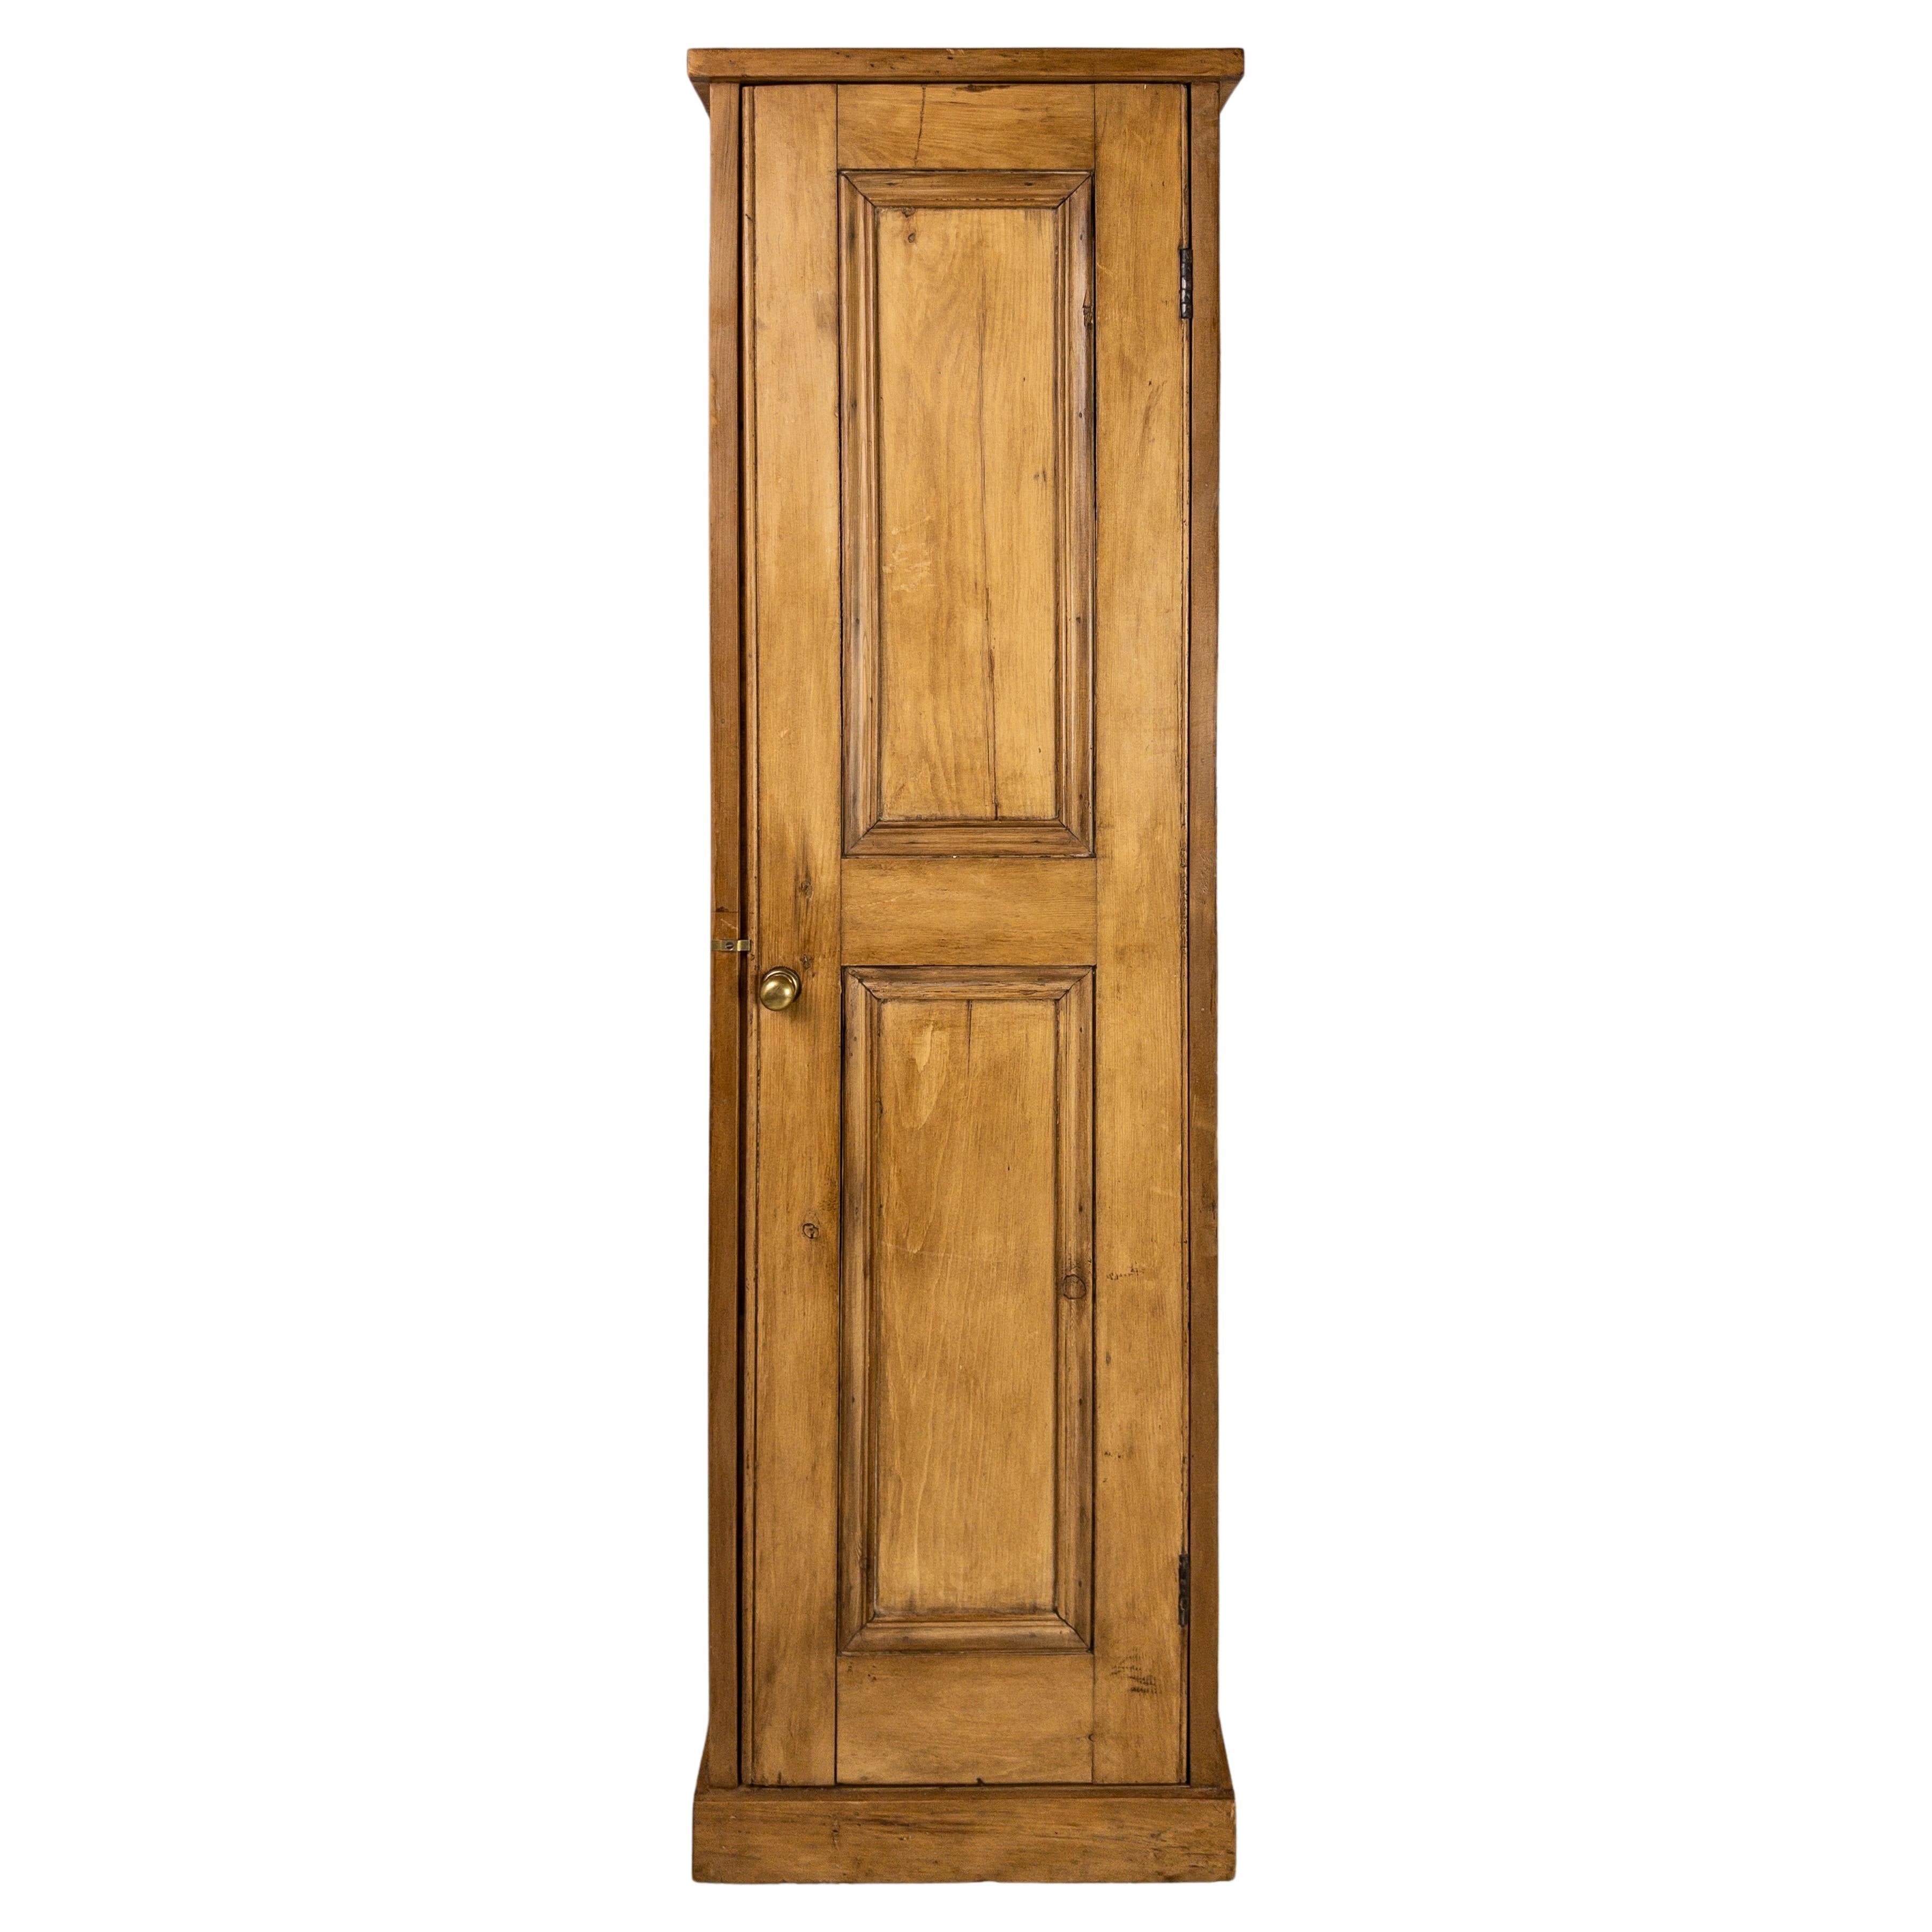 19th Century English Pine Tall Cabinet For Sale at 1stDibs